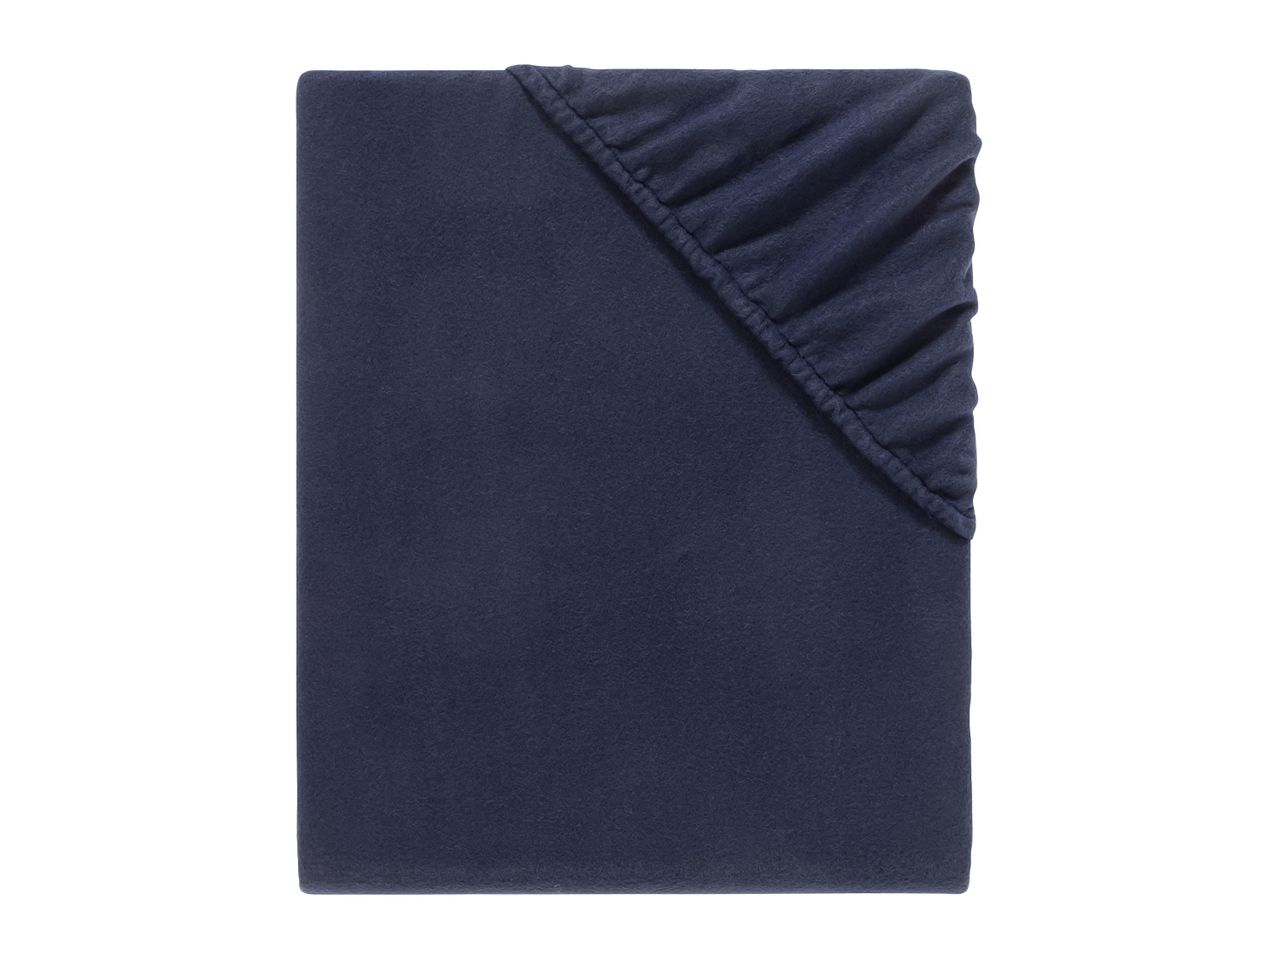 Go to full screen view: Livarno Home Fleece Fitted Sheet - Single - Image 4